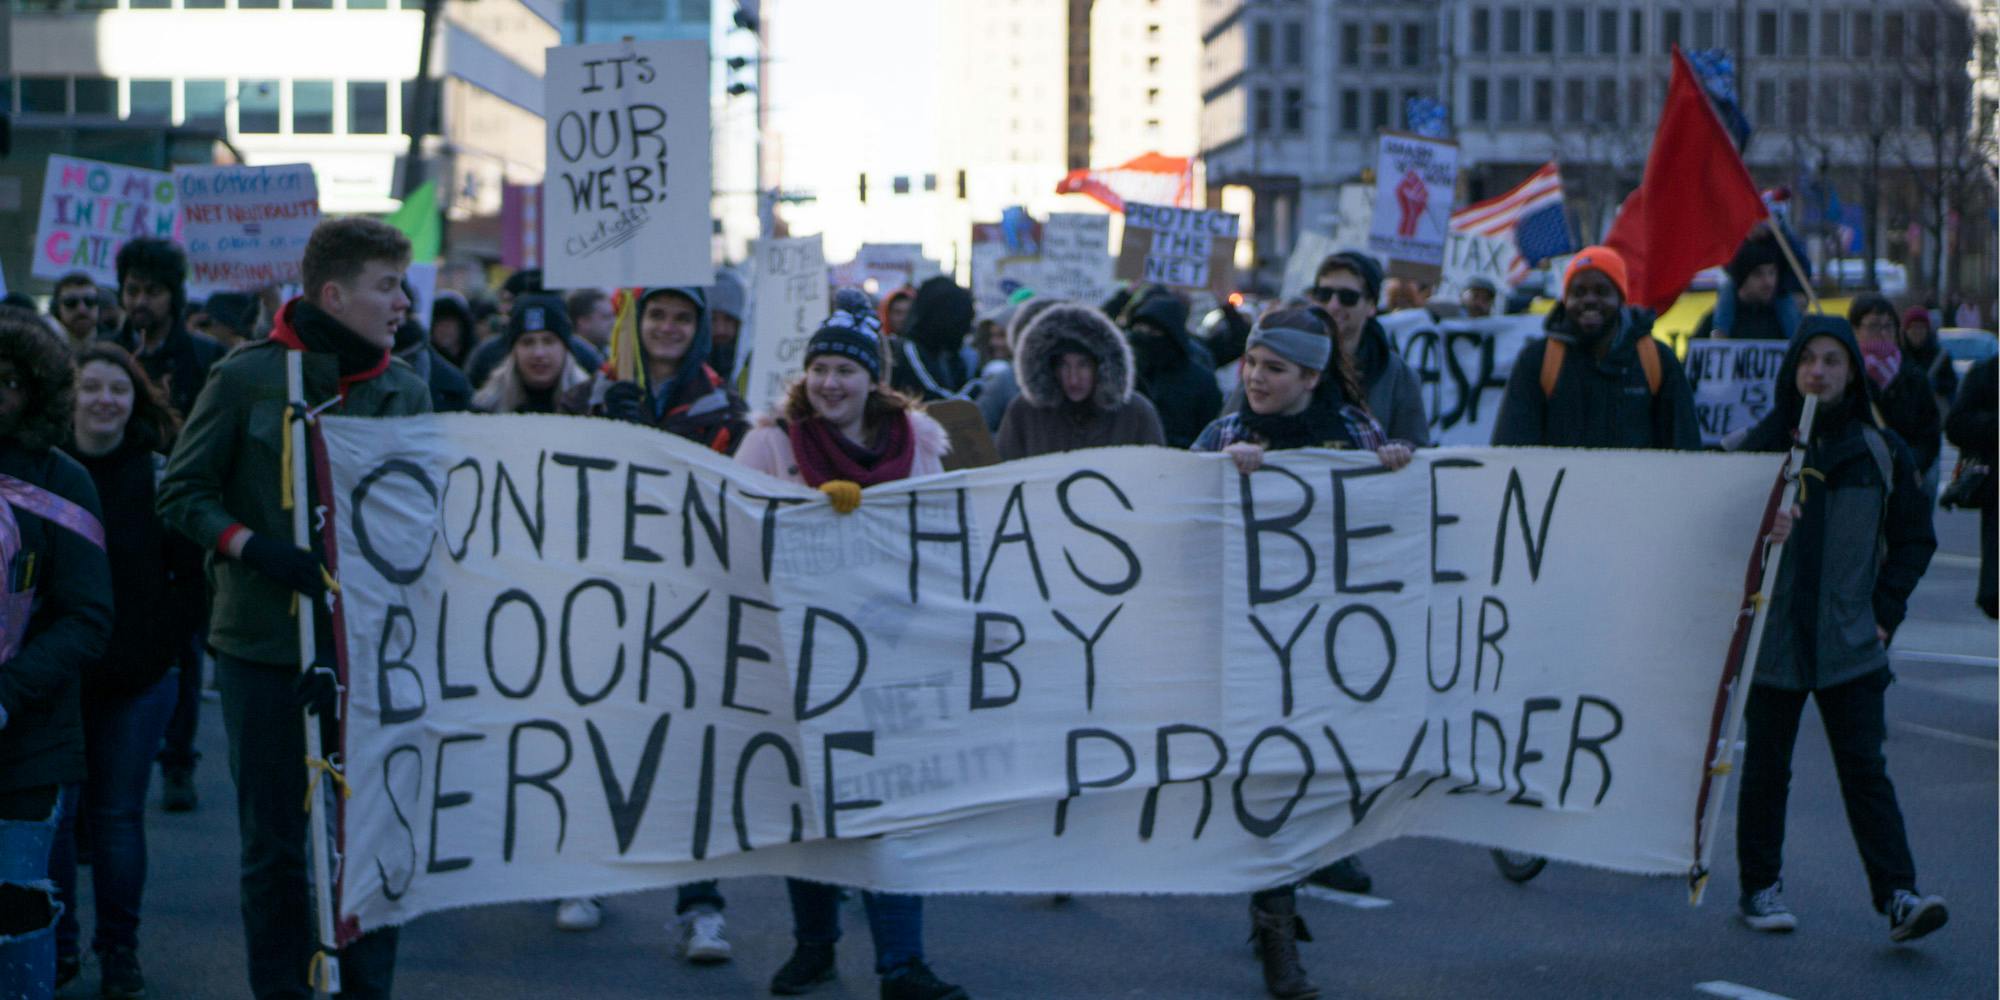 Supporters of net neutrality protesting.